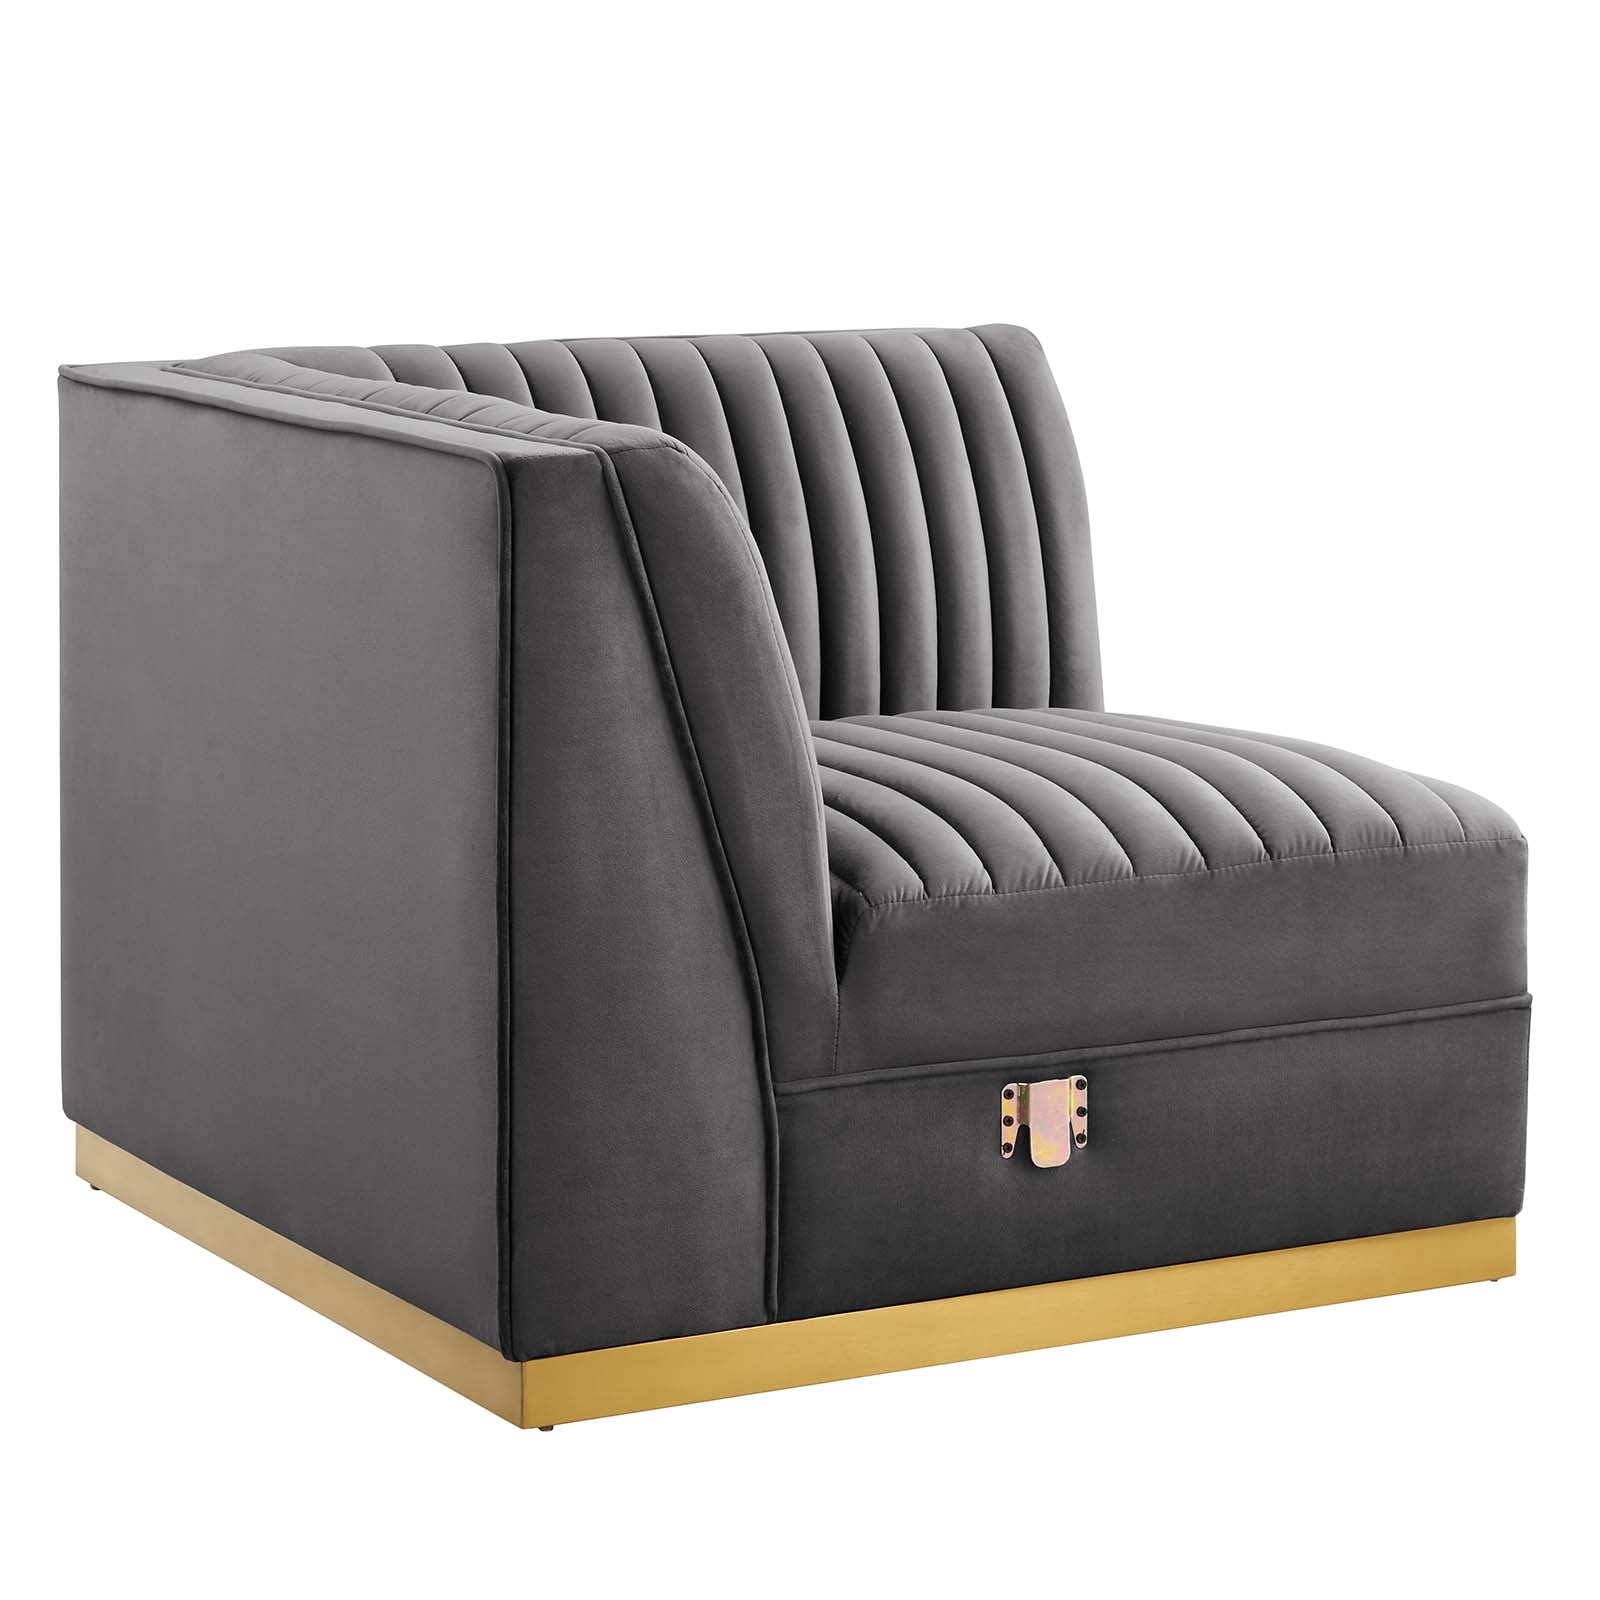 Modway Accent Chairs - Sanguine Channel Tufted Performance Velvet Modular Sectional Sofa Left Corner Chair Gray